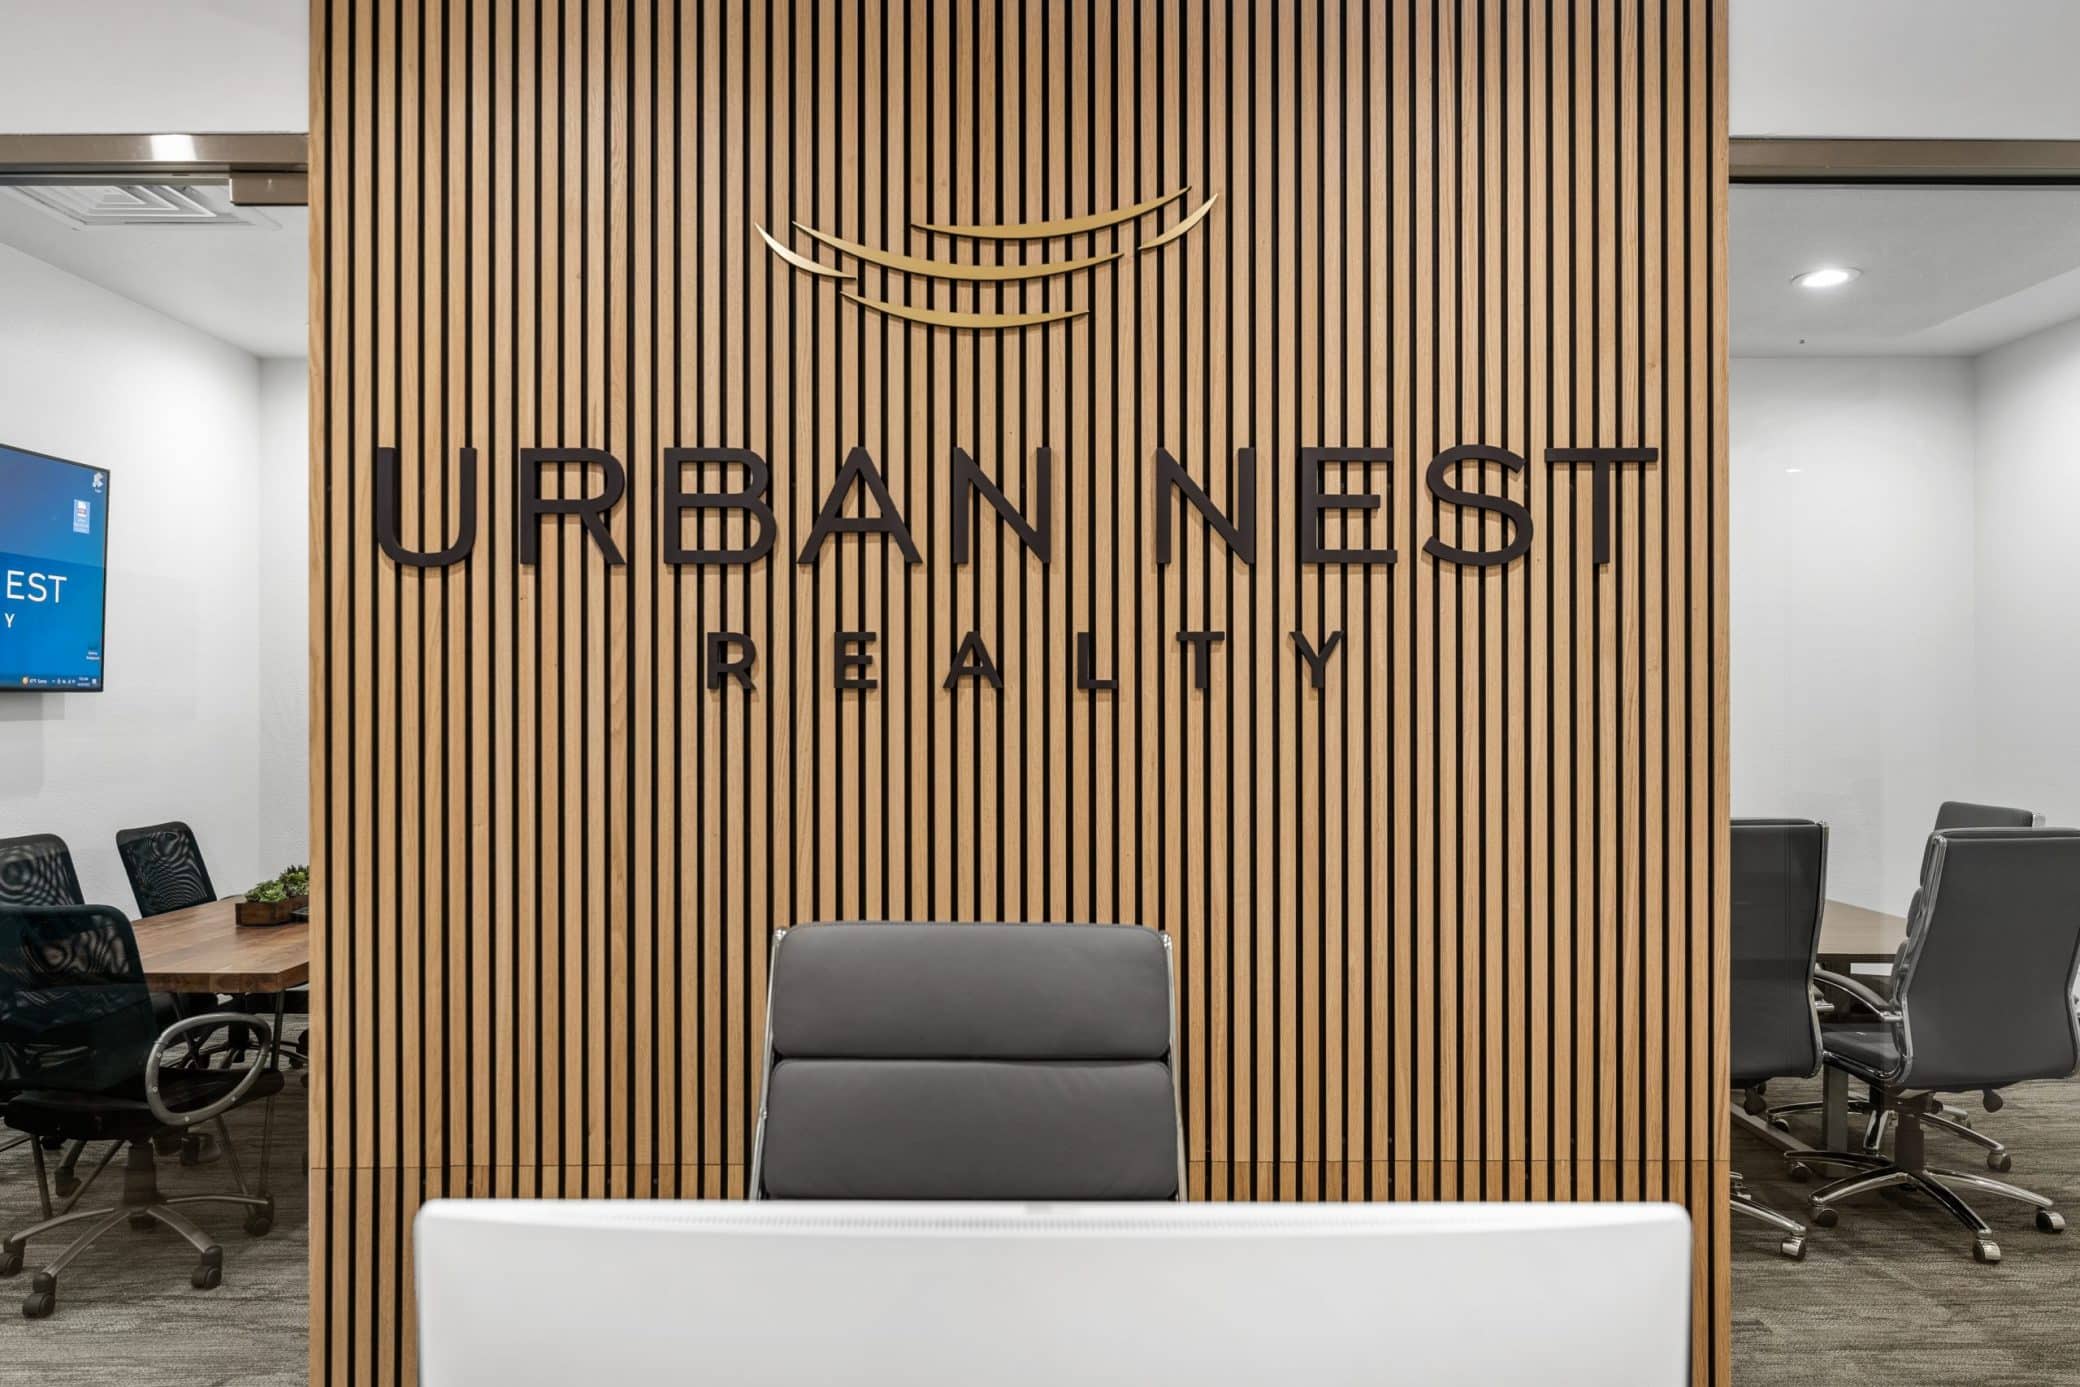 Kalb Industries completed an office tenant improvement for Urban Nest Realty.